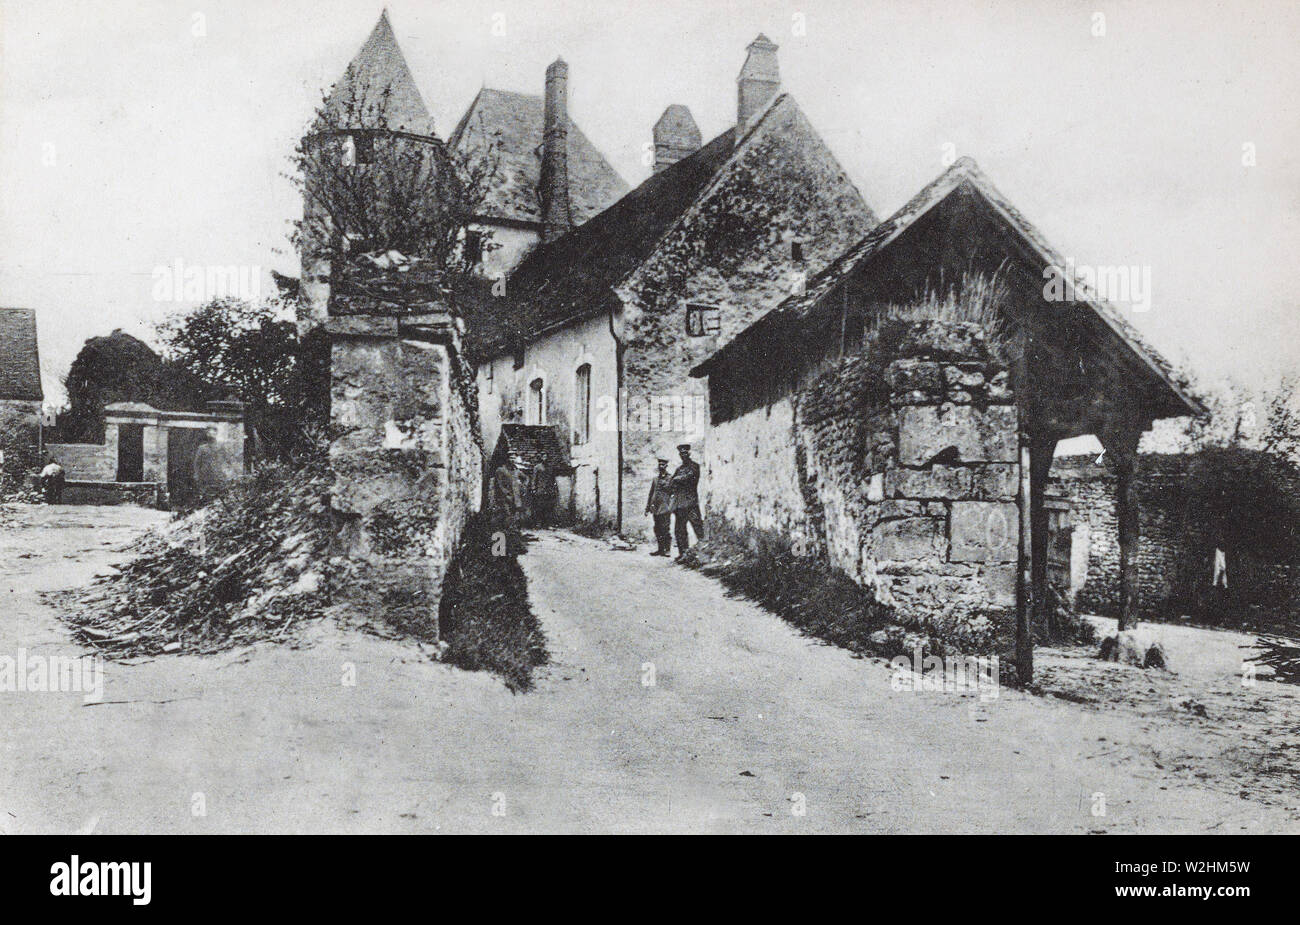 A SCENE IN THE TOWN OF St. Thomas, on the Aisne, France ca. 1918 Stock Photo